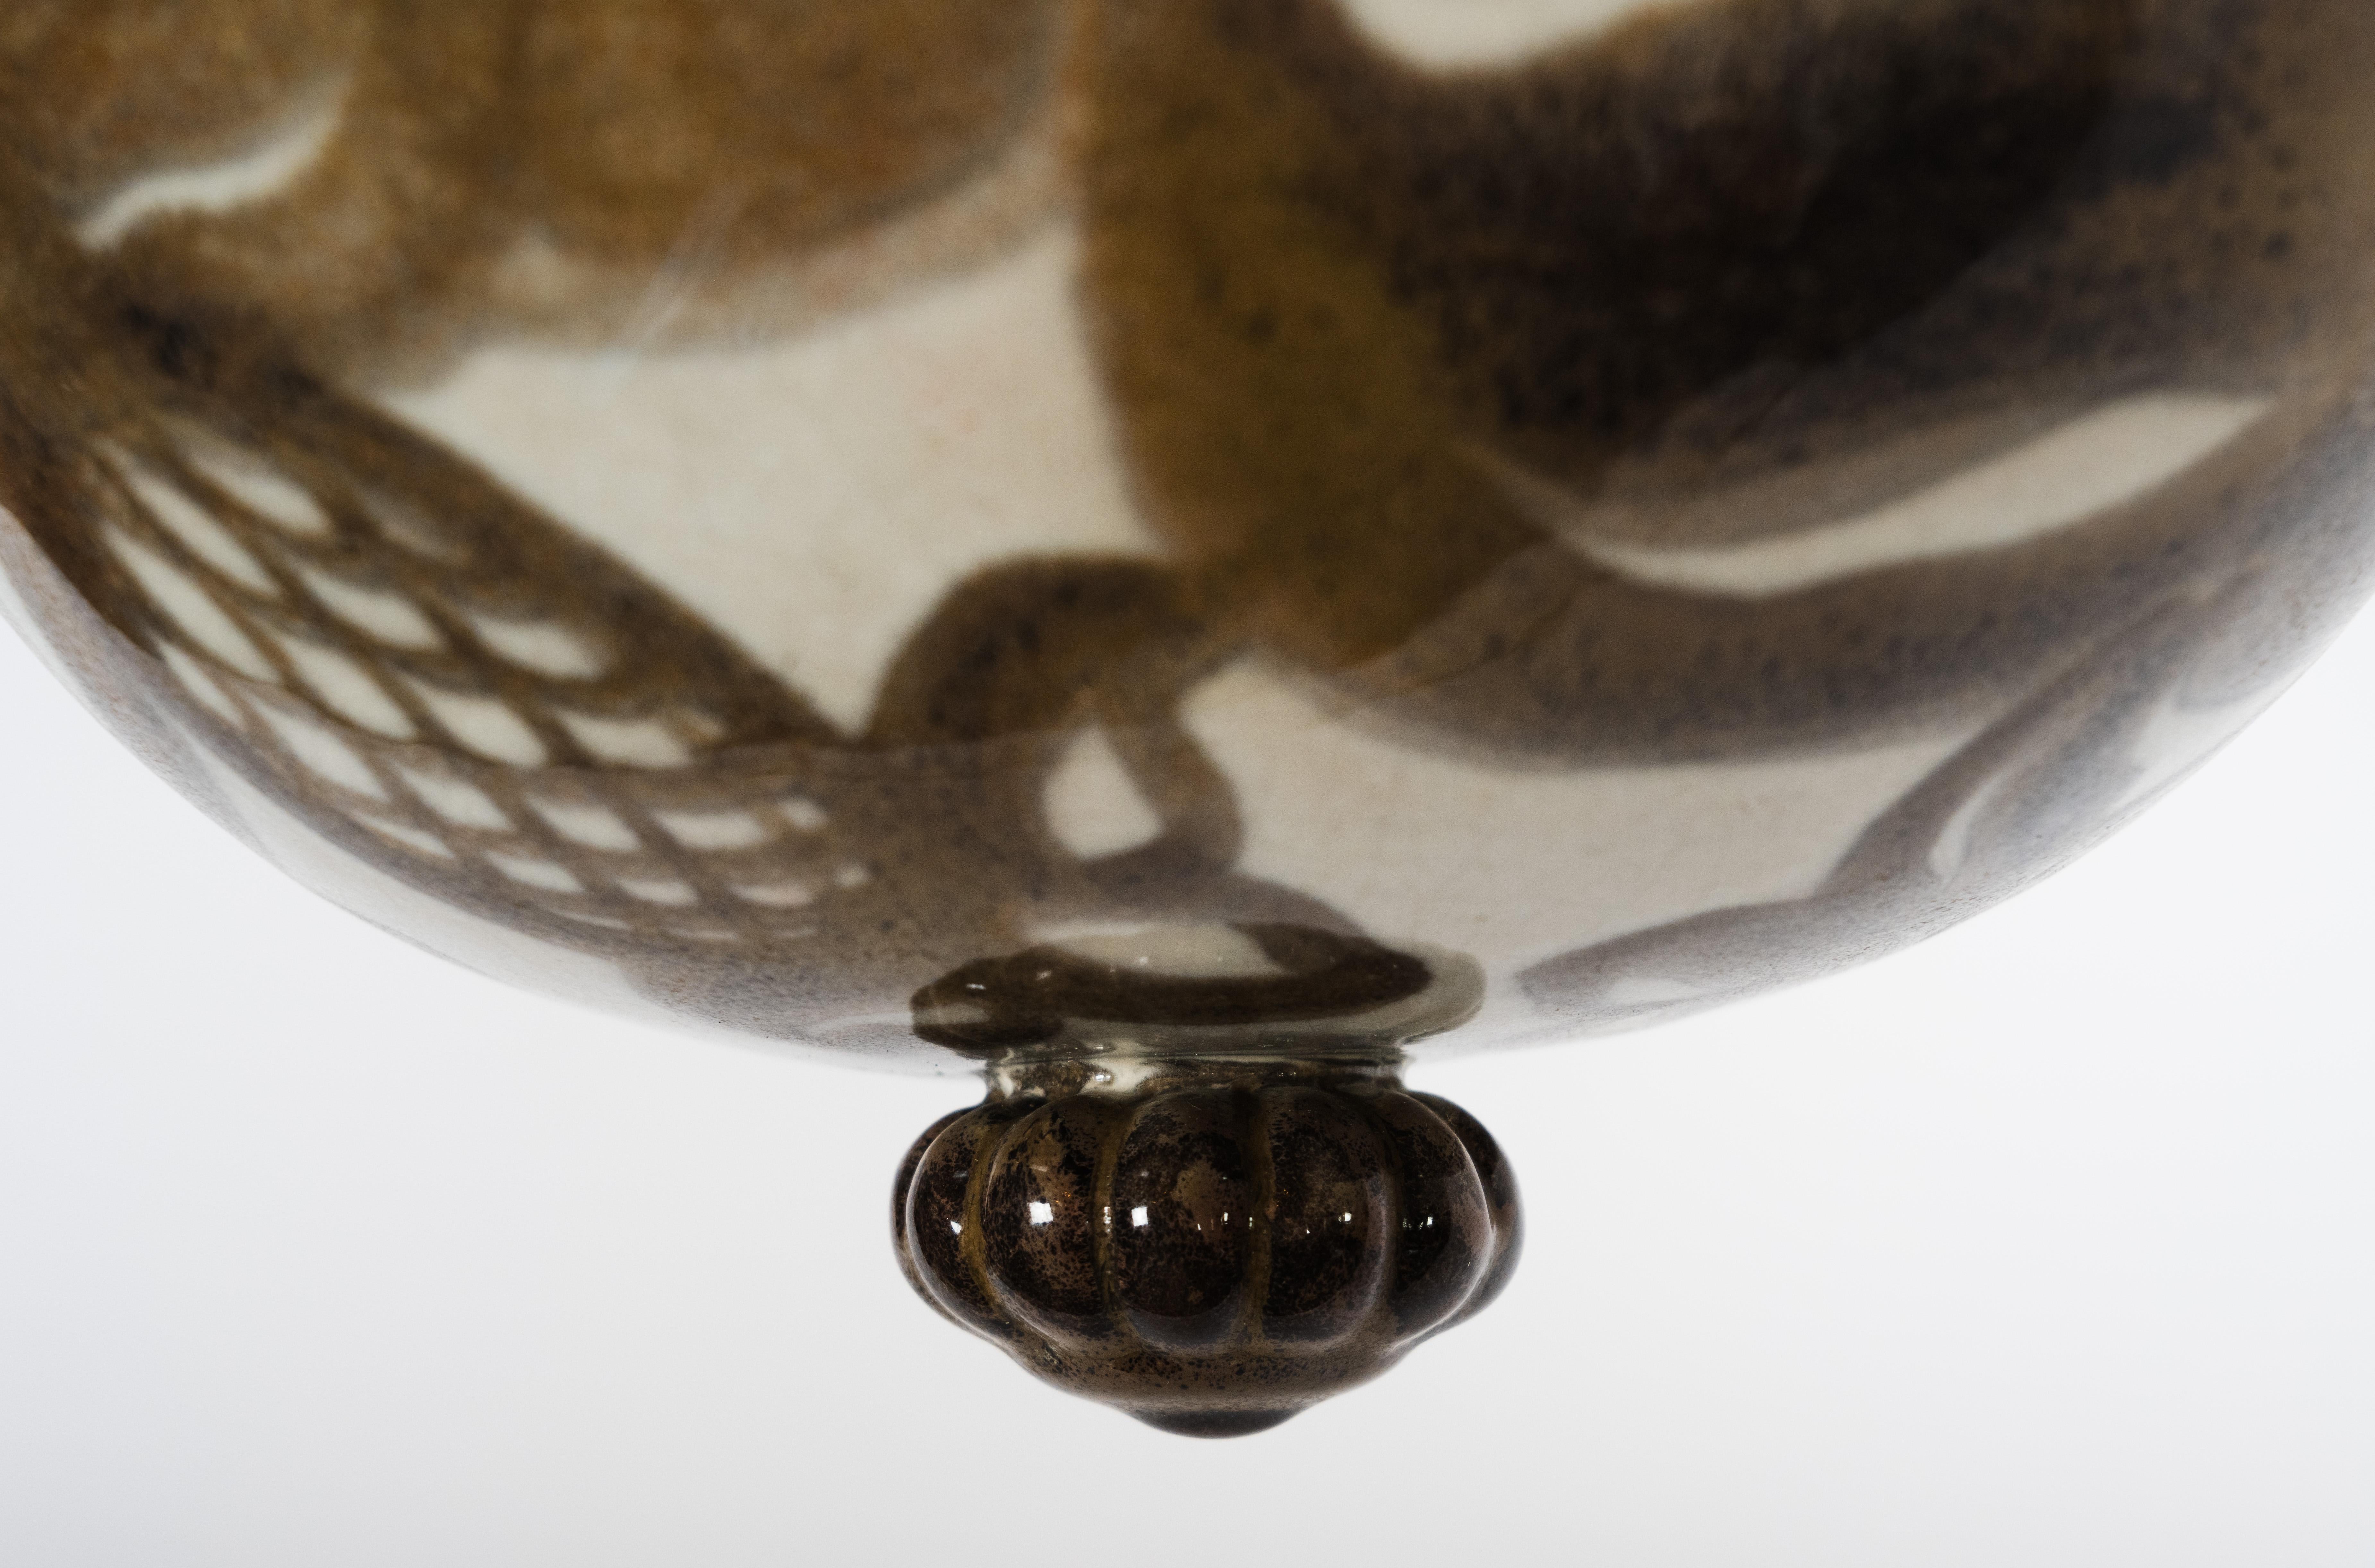 A two-tiered pendant light designed by Swedish artist Edgar Böckman (1890-1981) for Hoganas. Made of two Earthenware discs with pineapple motifs and striping suspended on three silk wire rope cords. Circa 1930s.